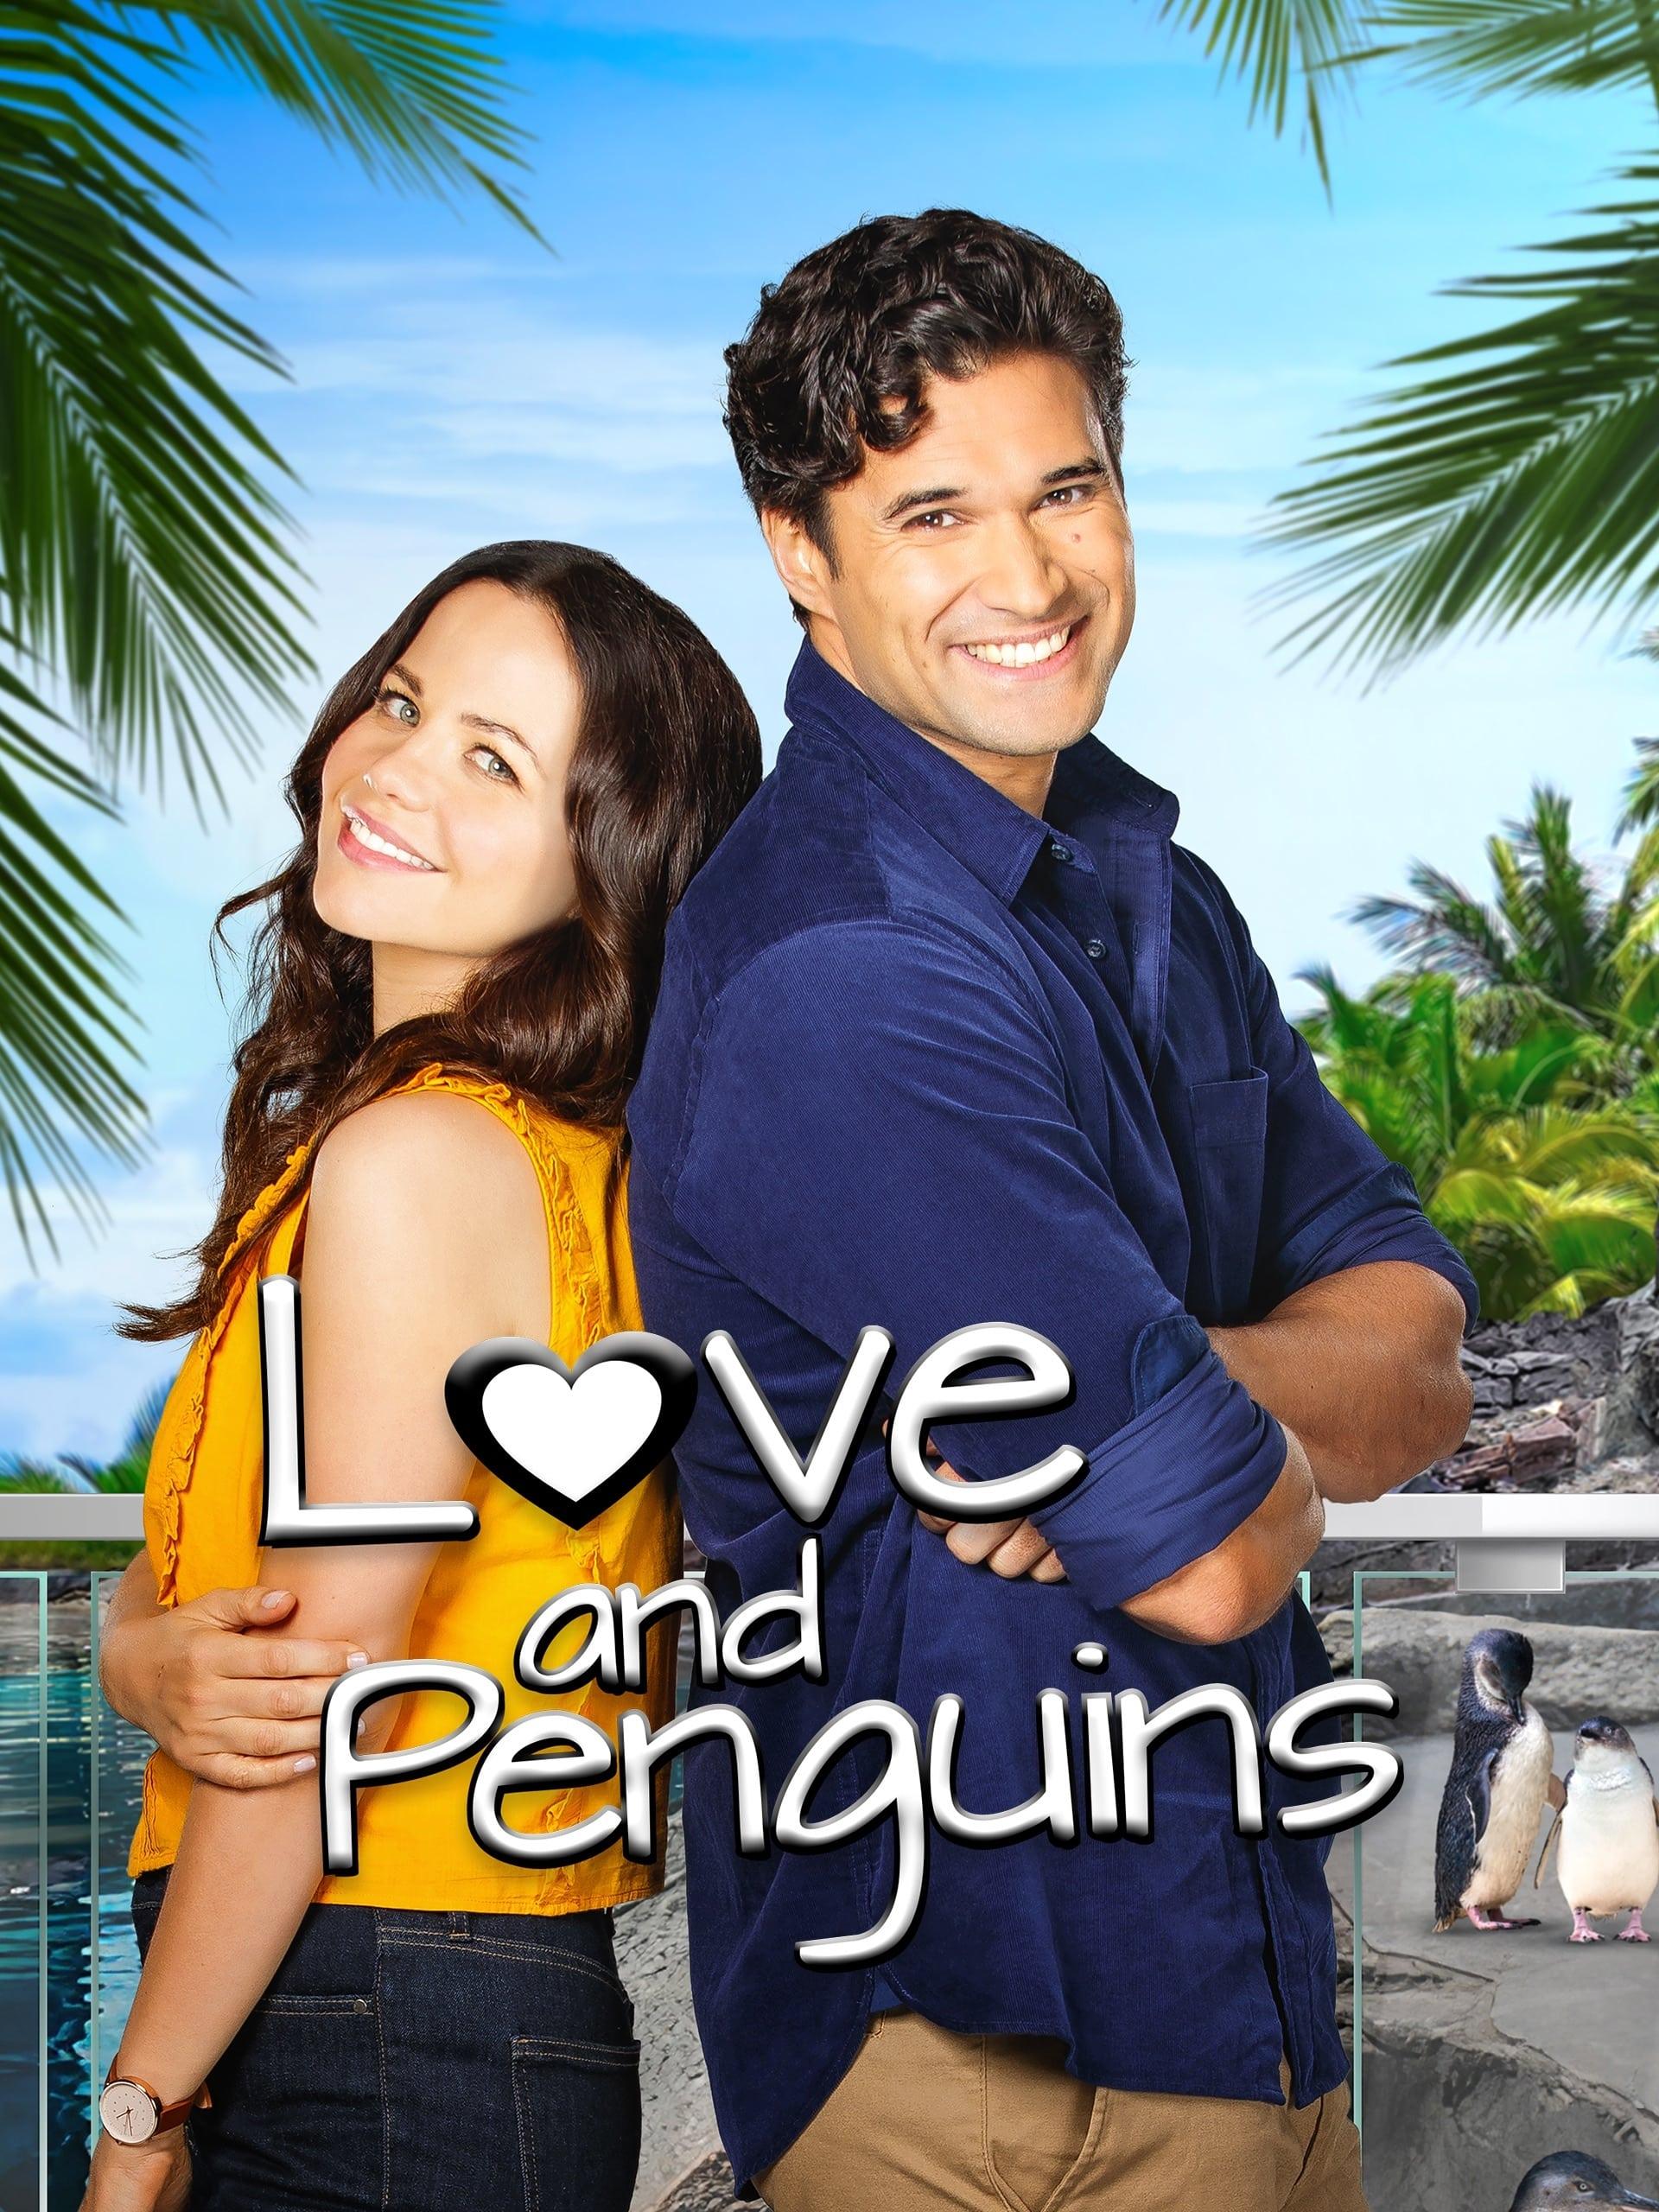 Love and Penguins poster